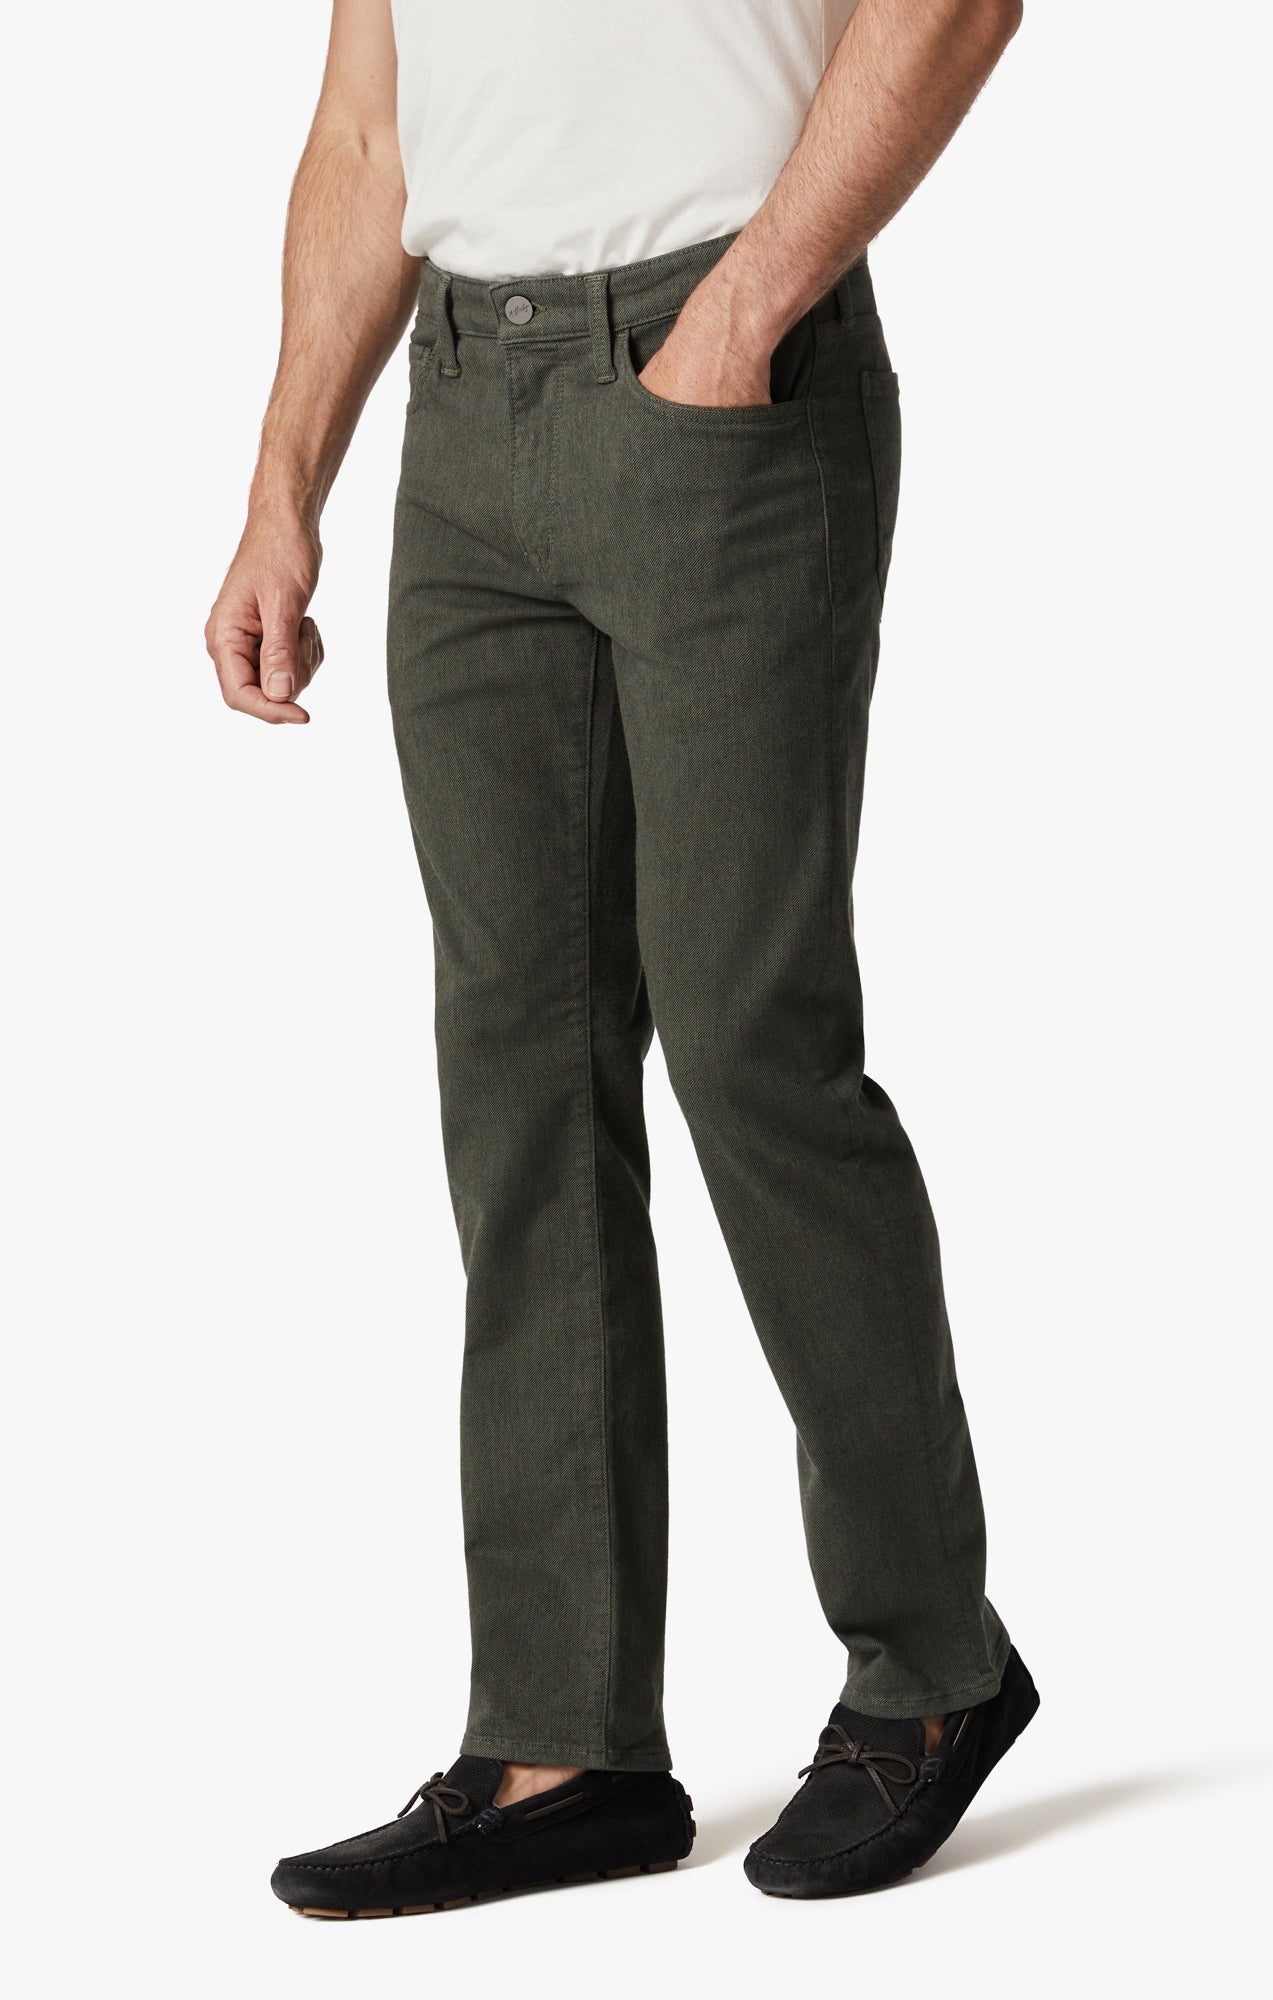 Courage Straight Leg Pants in Forest Diagonal Image 3